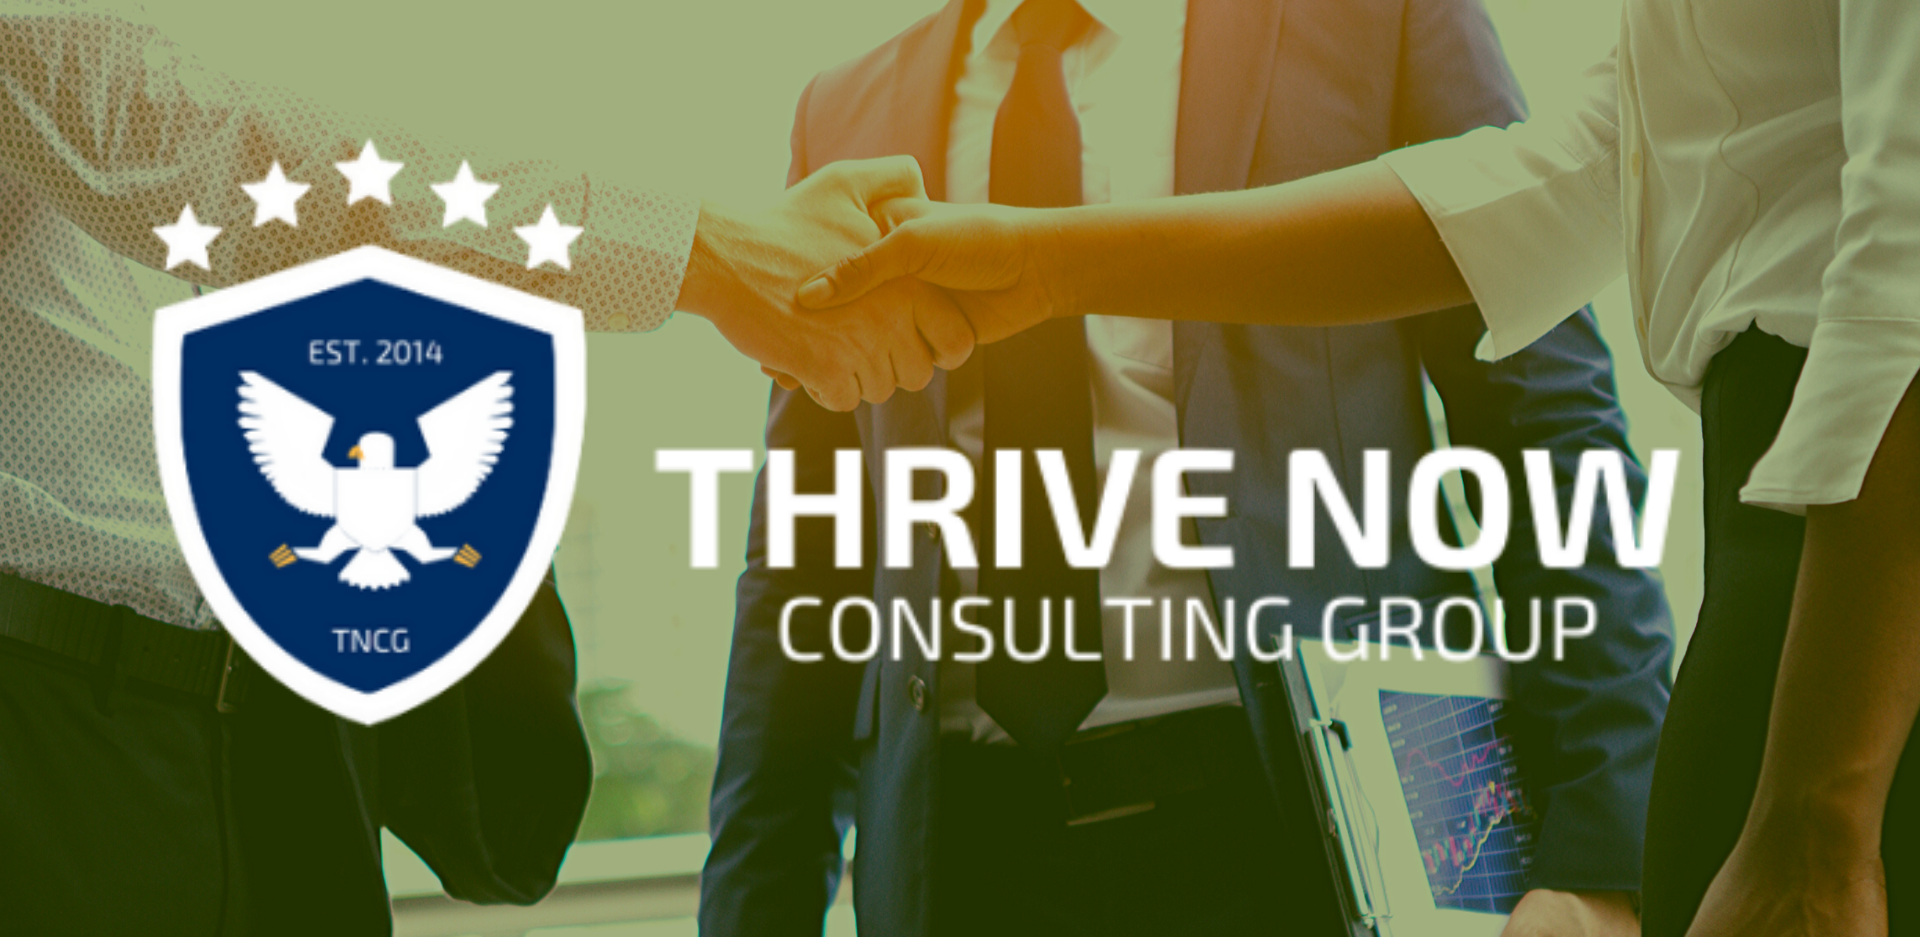 Thrive Now Consulting Group